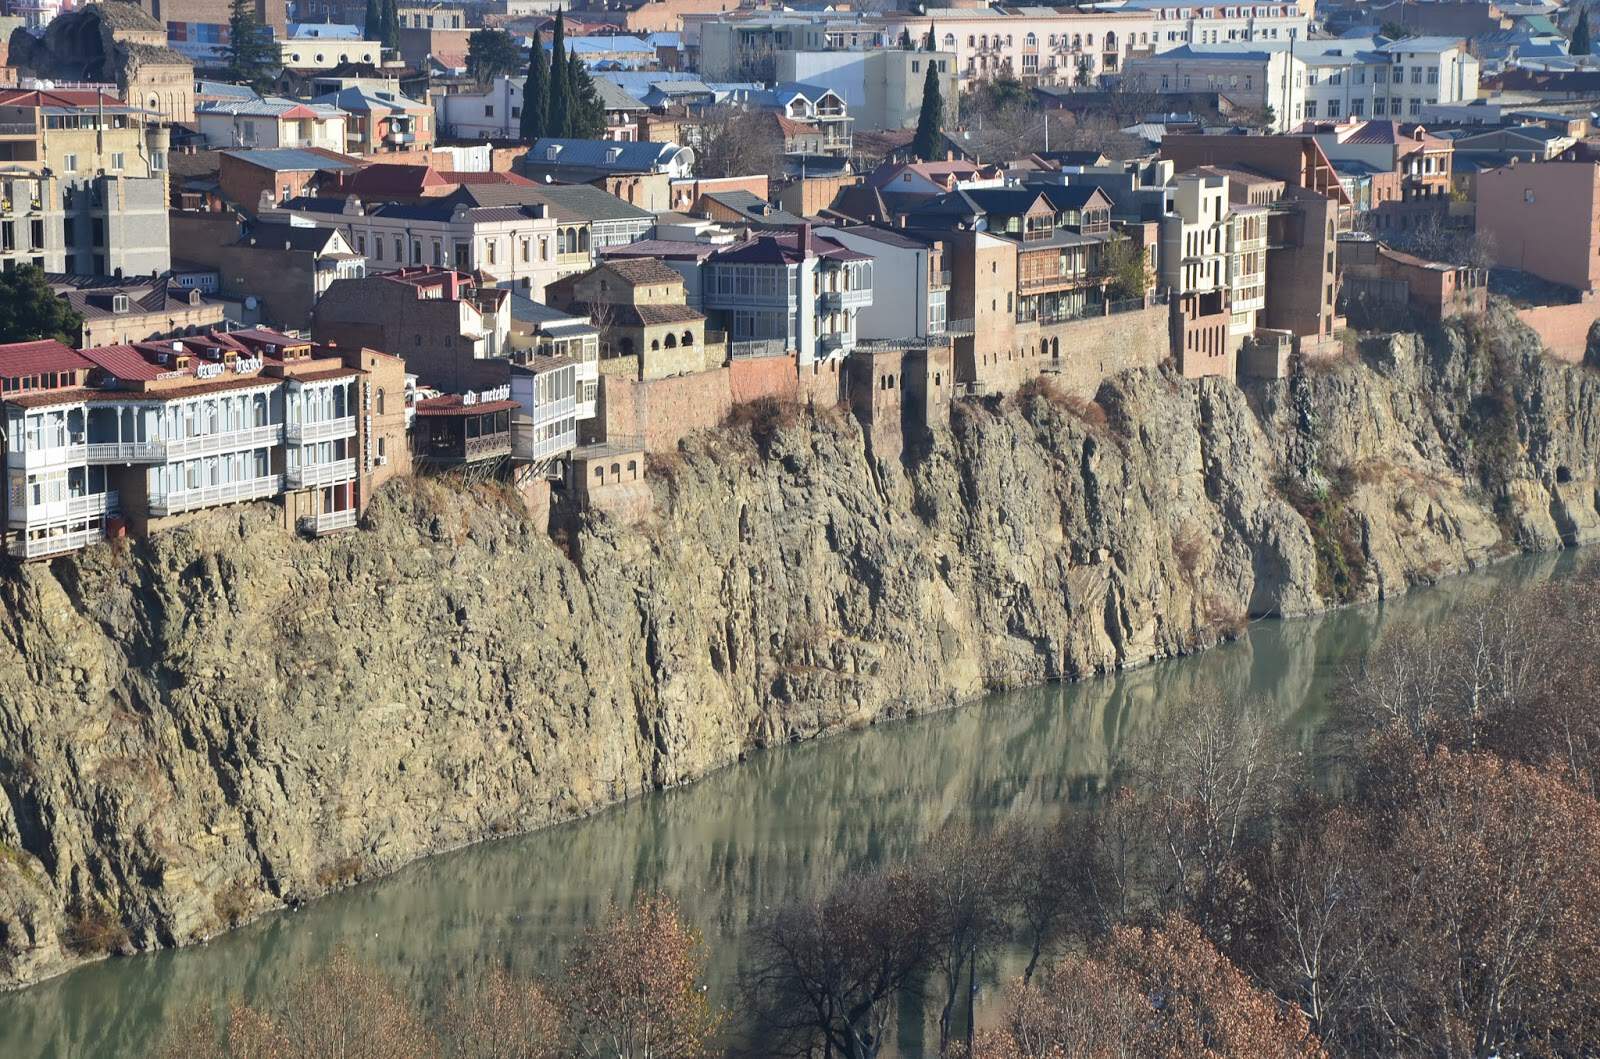 View from Narikala Fortress in Tbilisi, Georgia